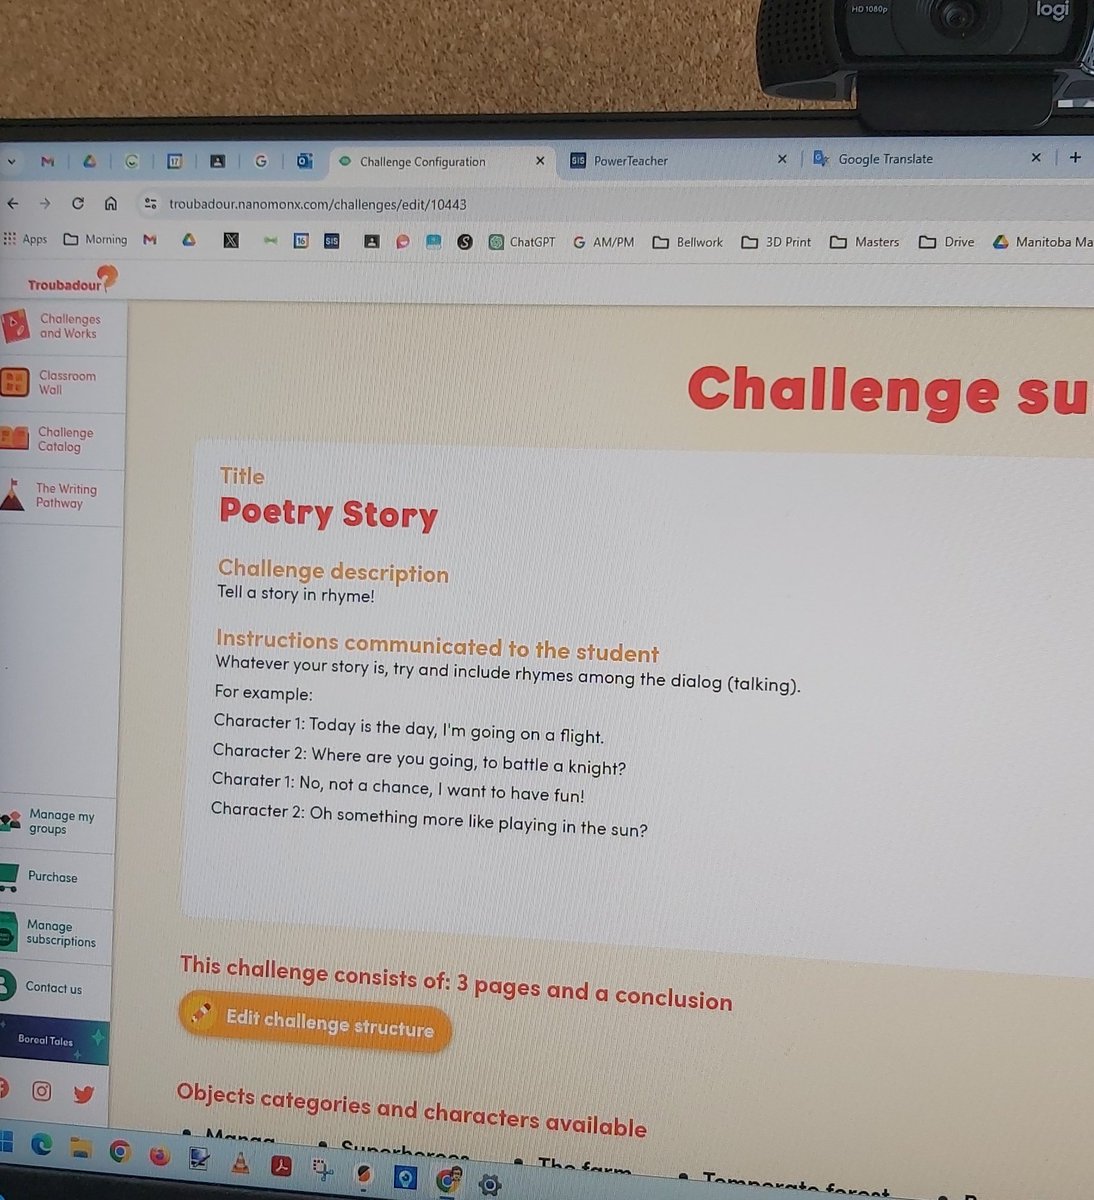 Using Troubadour for writing story poems today. Thanks again for the intro, @Lkennedy37!